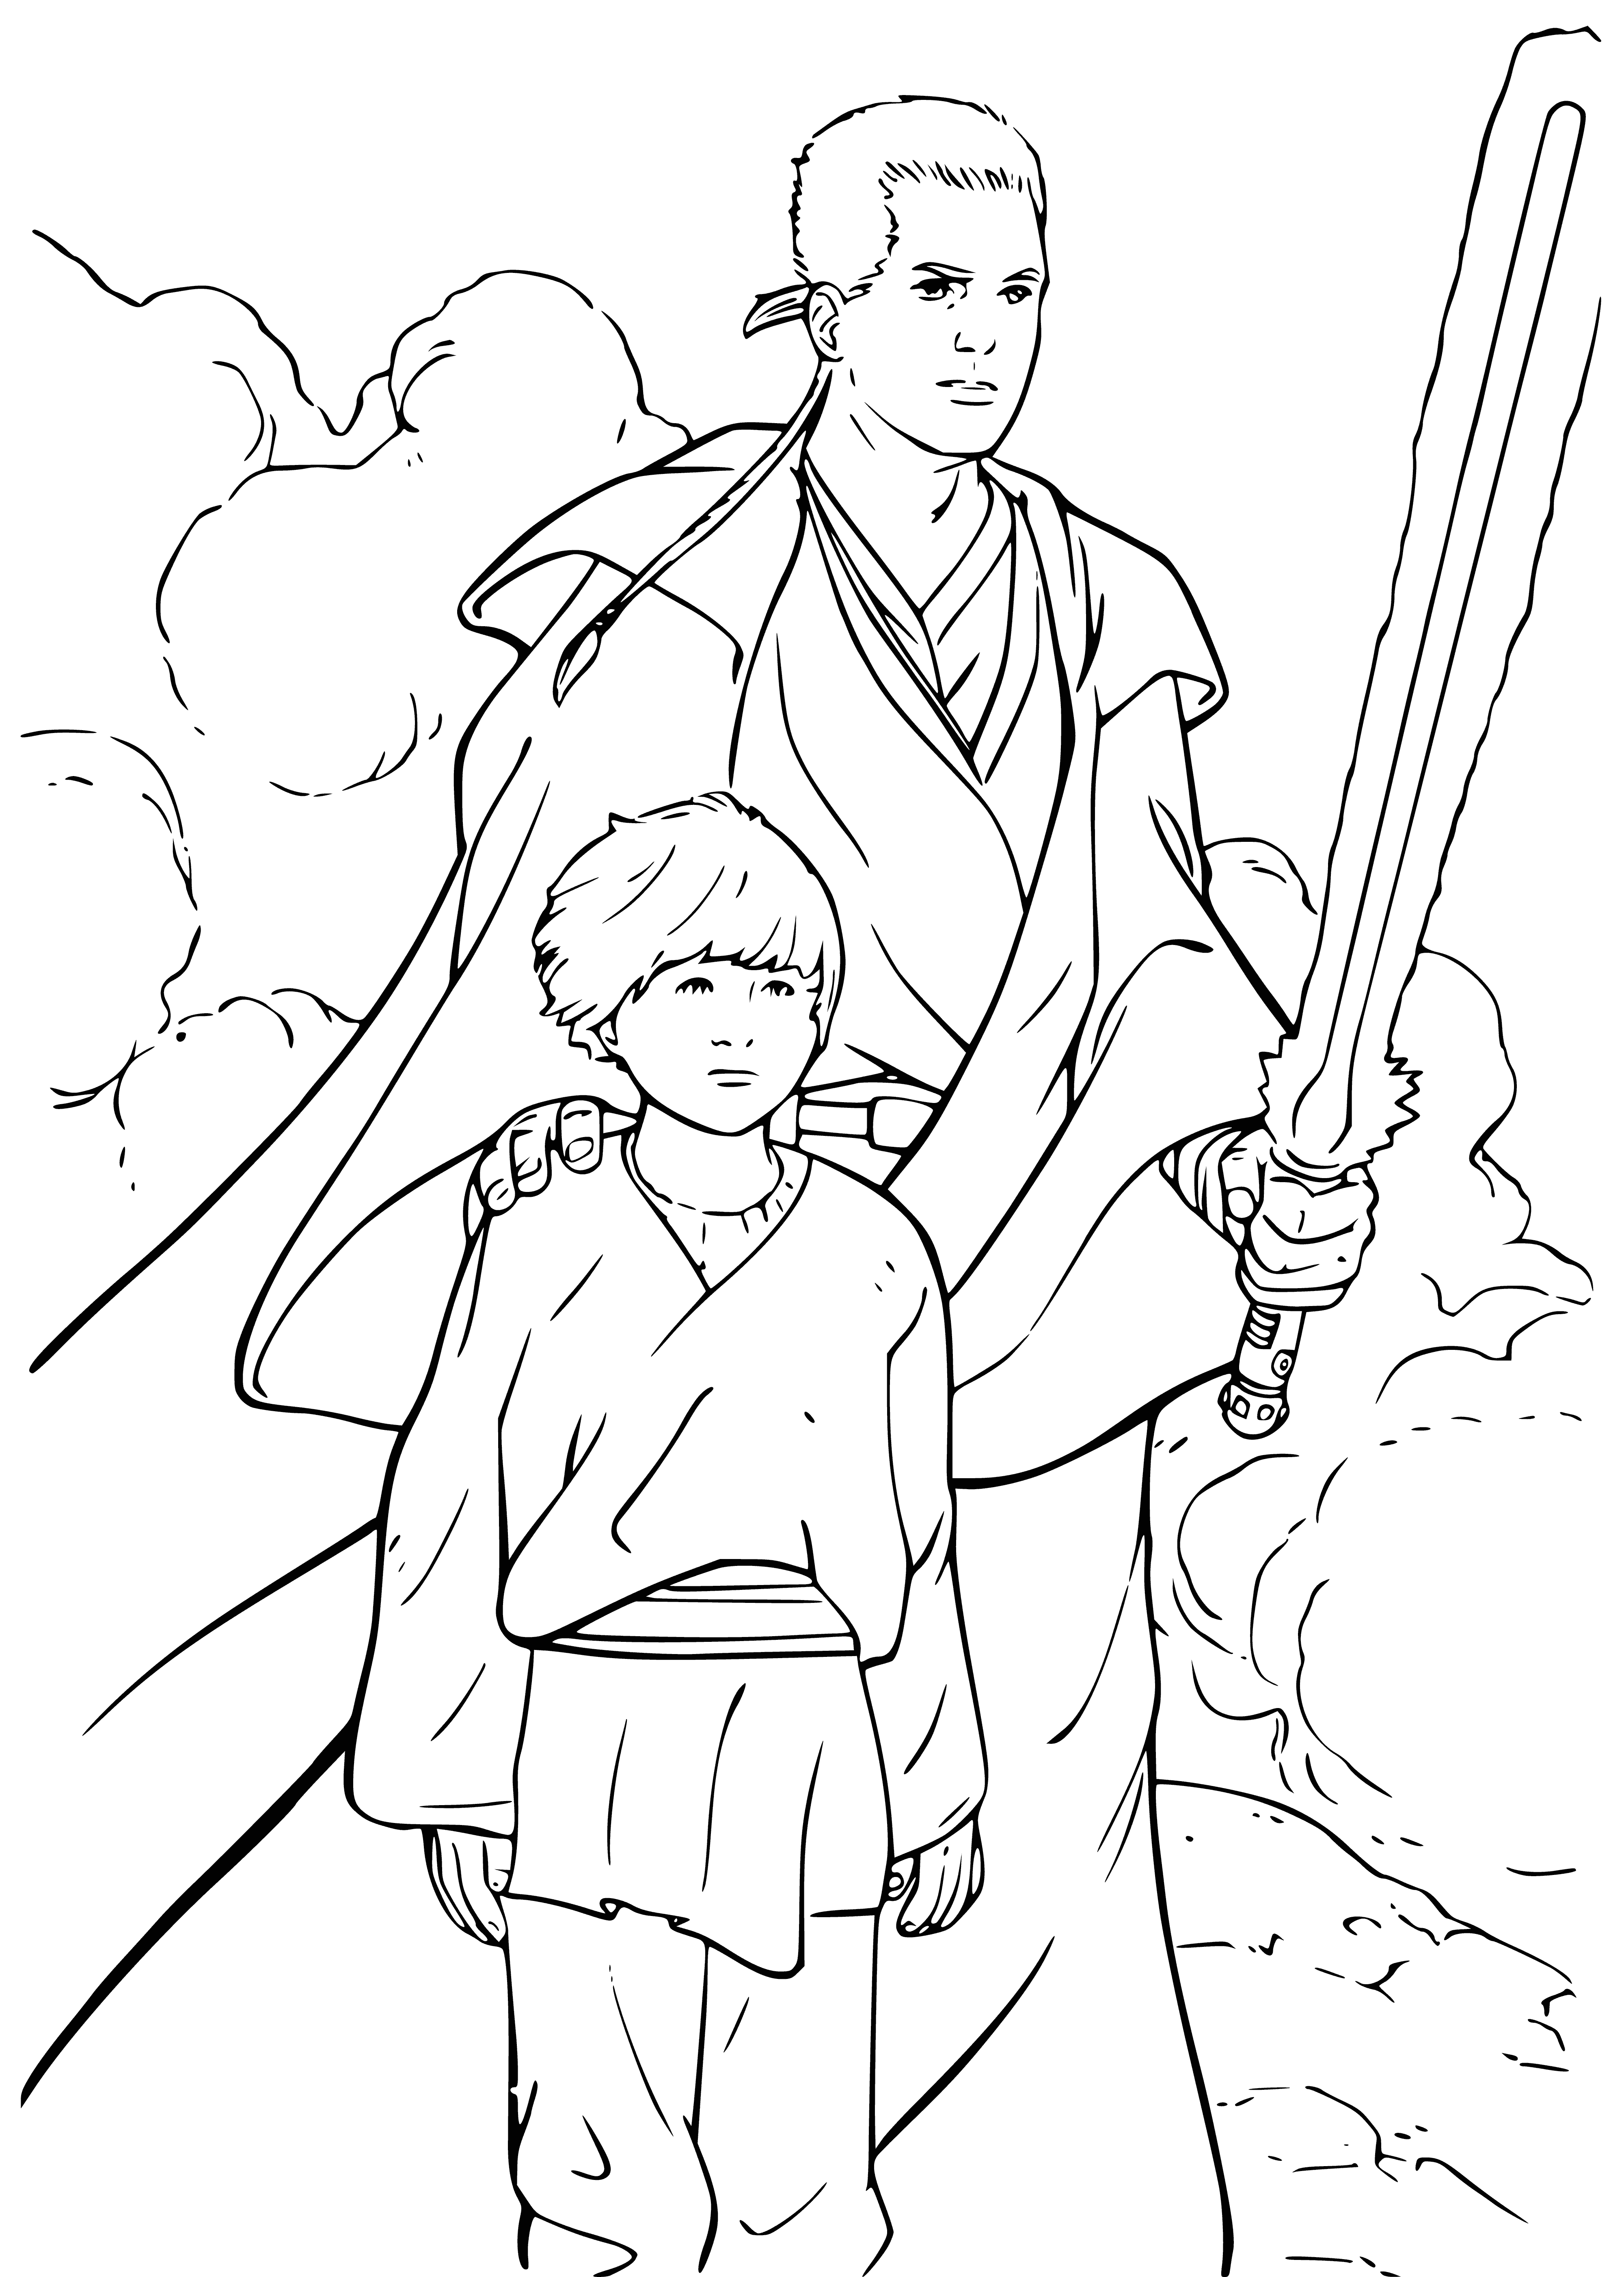 coloring page: Obi-Wan and Anakin stand ready to fight, each with a light saber in hand set against a desert backdrop. #StarWars